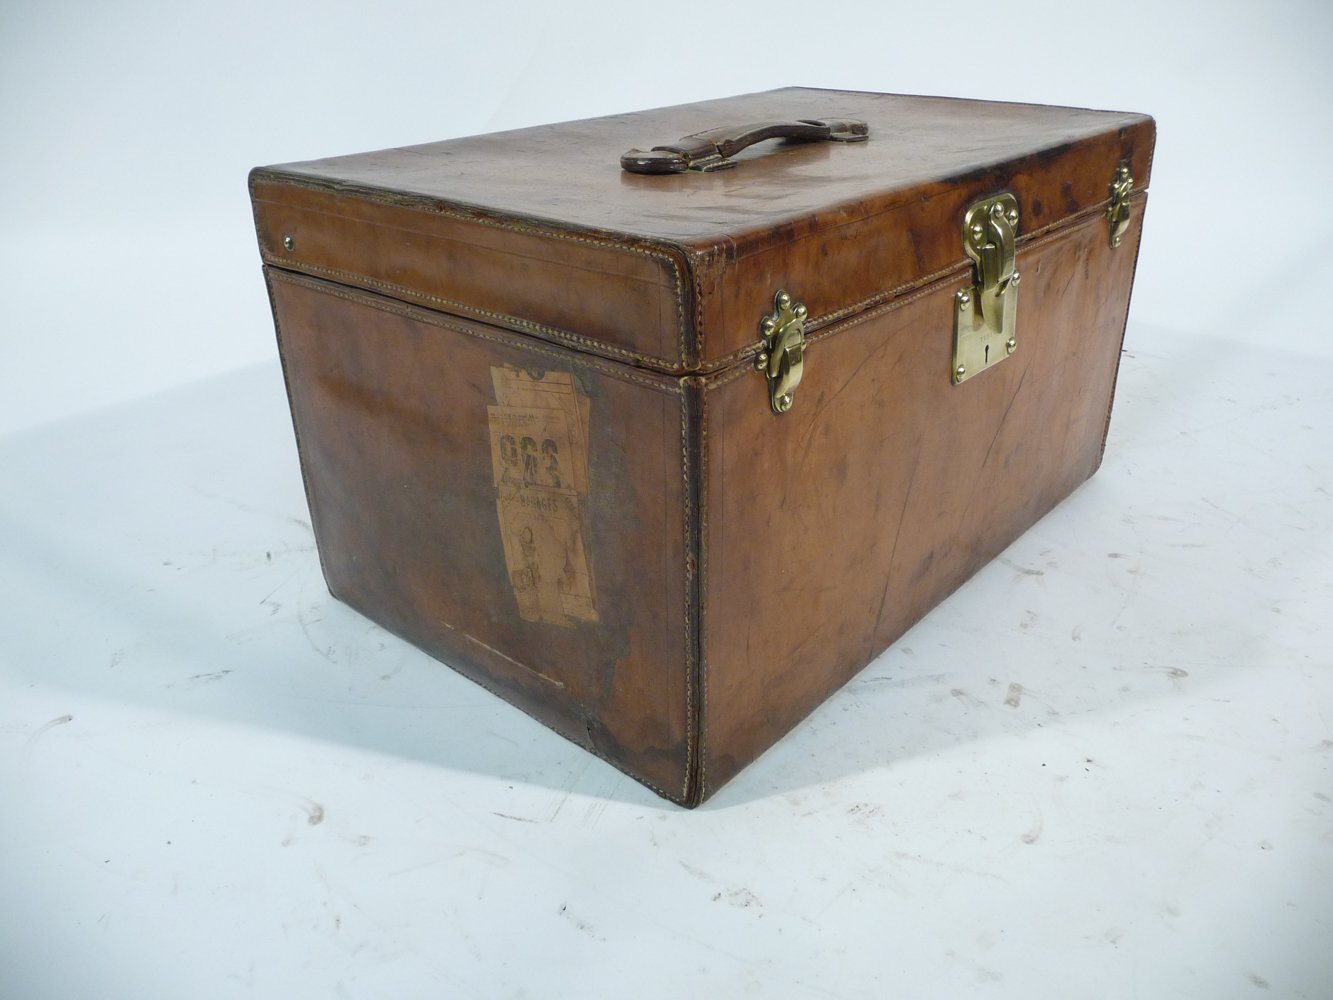 Vintage French Leather Trunk Louis Vuitton for sale at Pamono